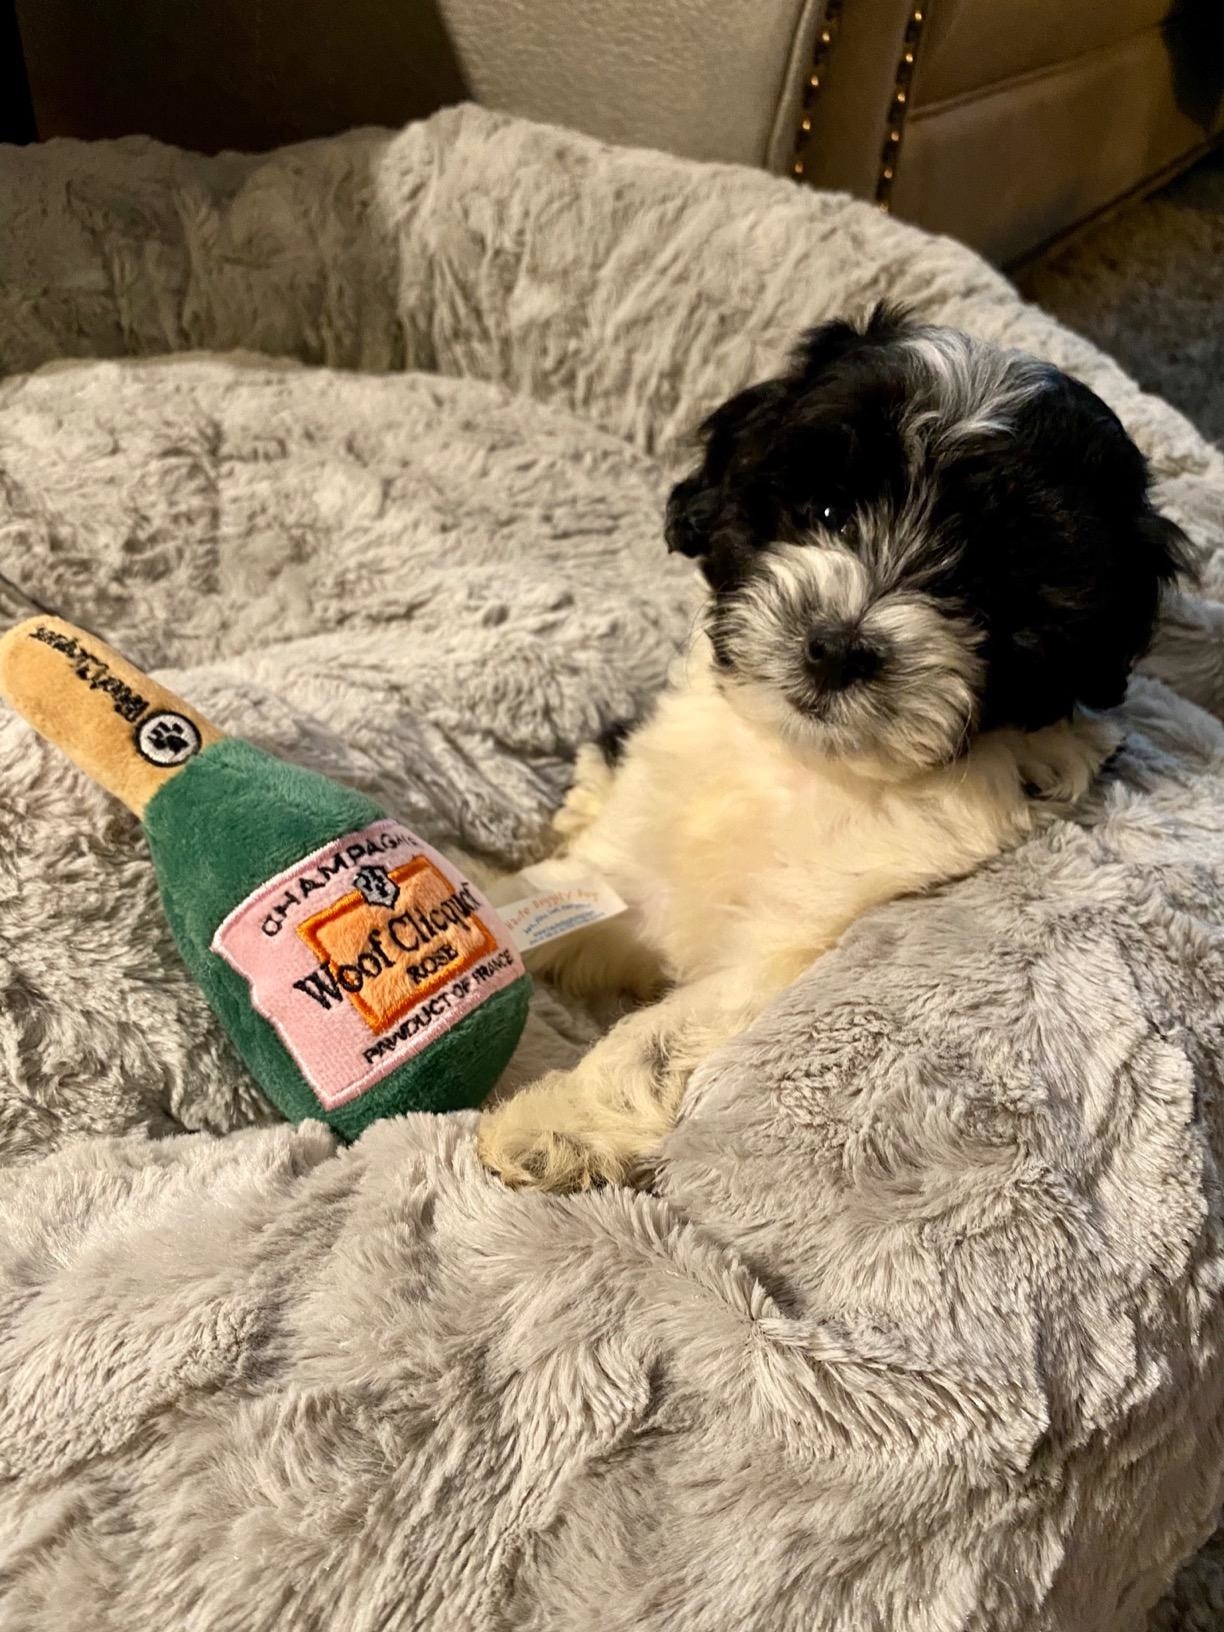 The champagne bottle chew toy, which has a cylindrical body and narrow top